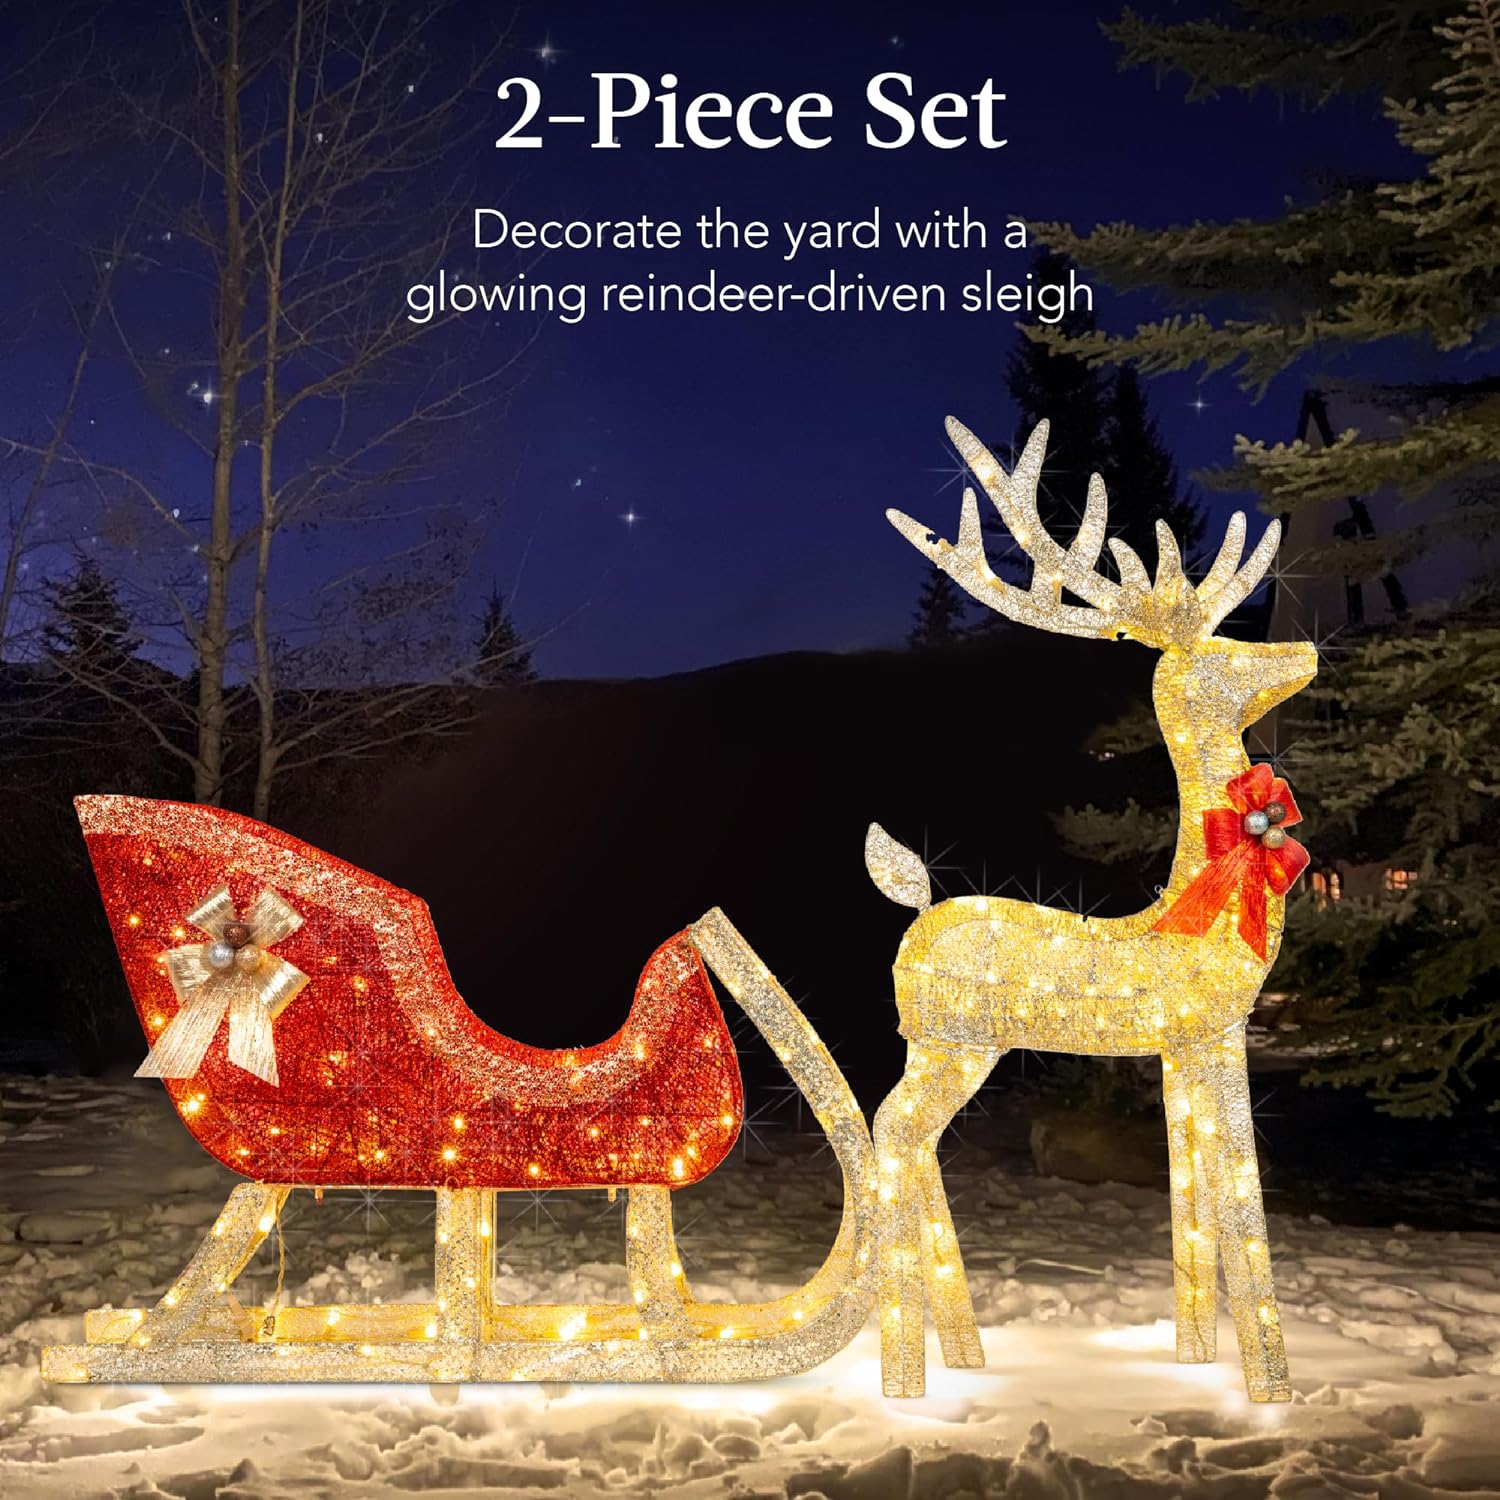 Best Choice Products Lighted Christmas 4ft Reindeer & Sleigh Outdoor Yard Decoration Set w/ 205 LED Lights, Stakes - Gold - image 2 of 7